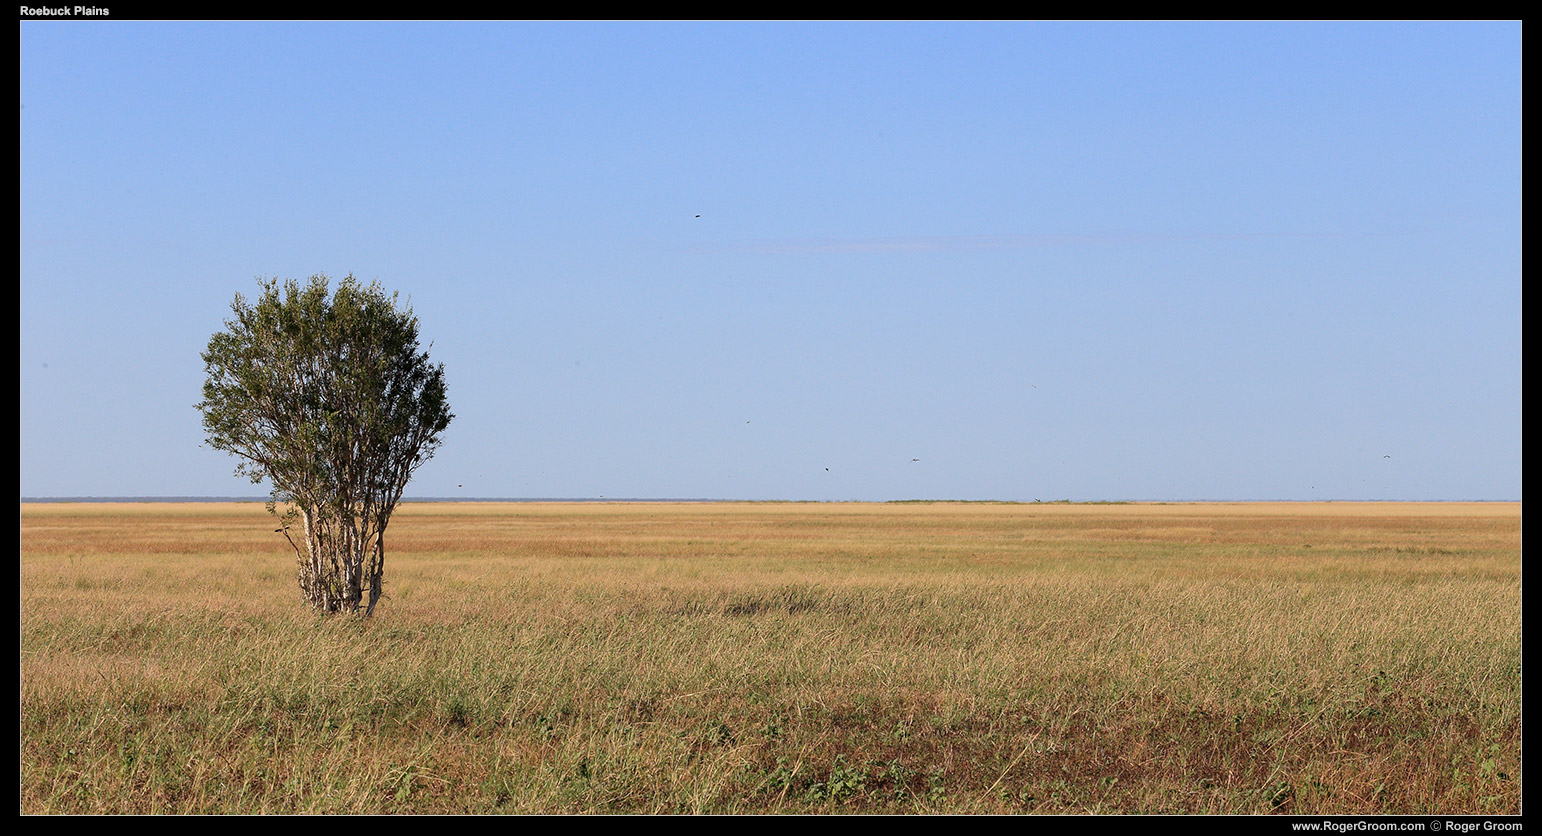 I didn't imagine Australia had such large open grasslands, not natural anyhow. This is Roebuck Plains, taken on a tour with Broome Bird Observatory. Endless plains of grass you literally cannot see the end of, yet teaming with birds.